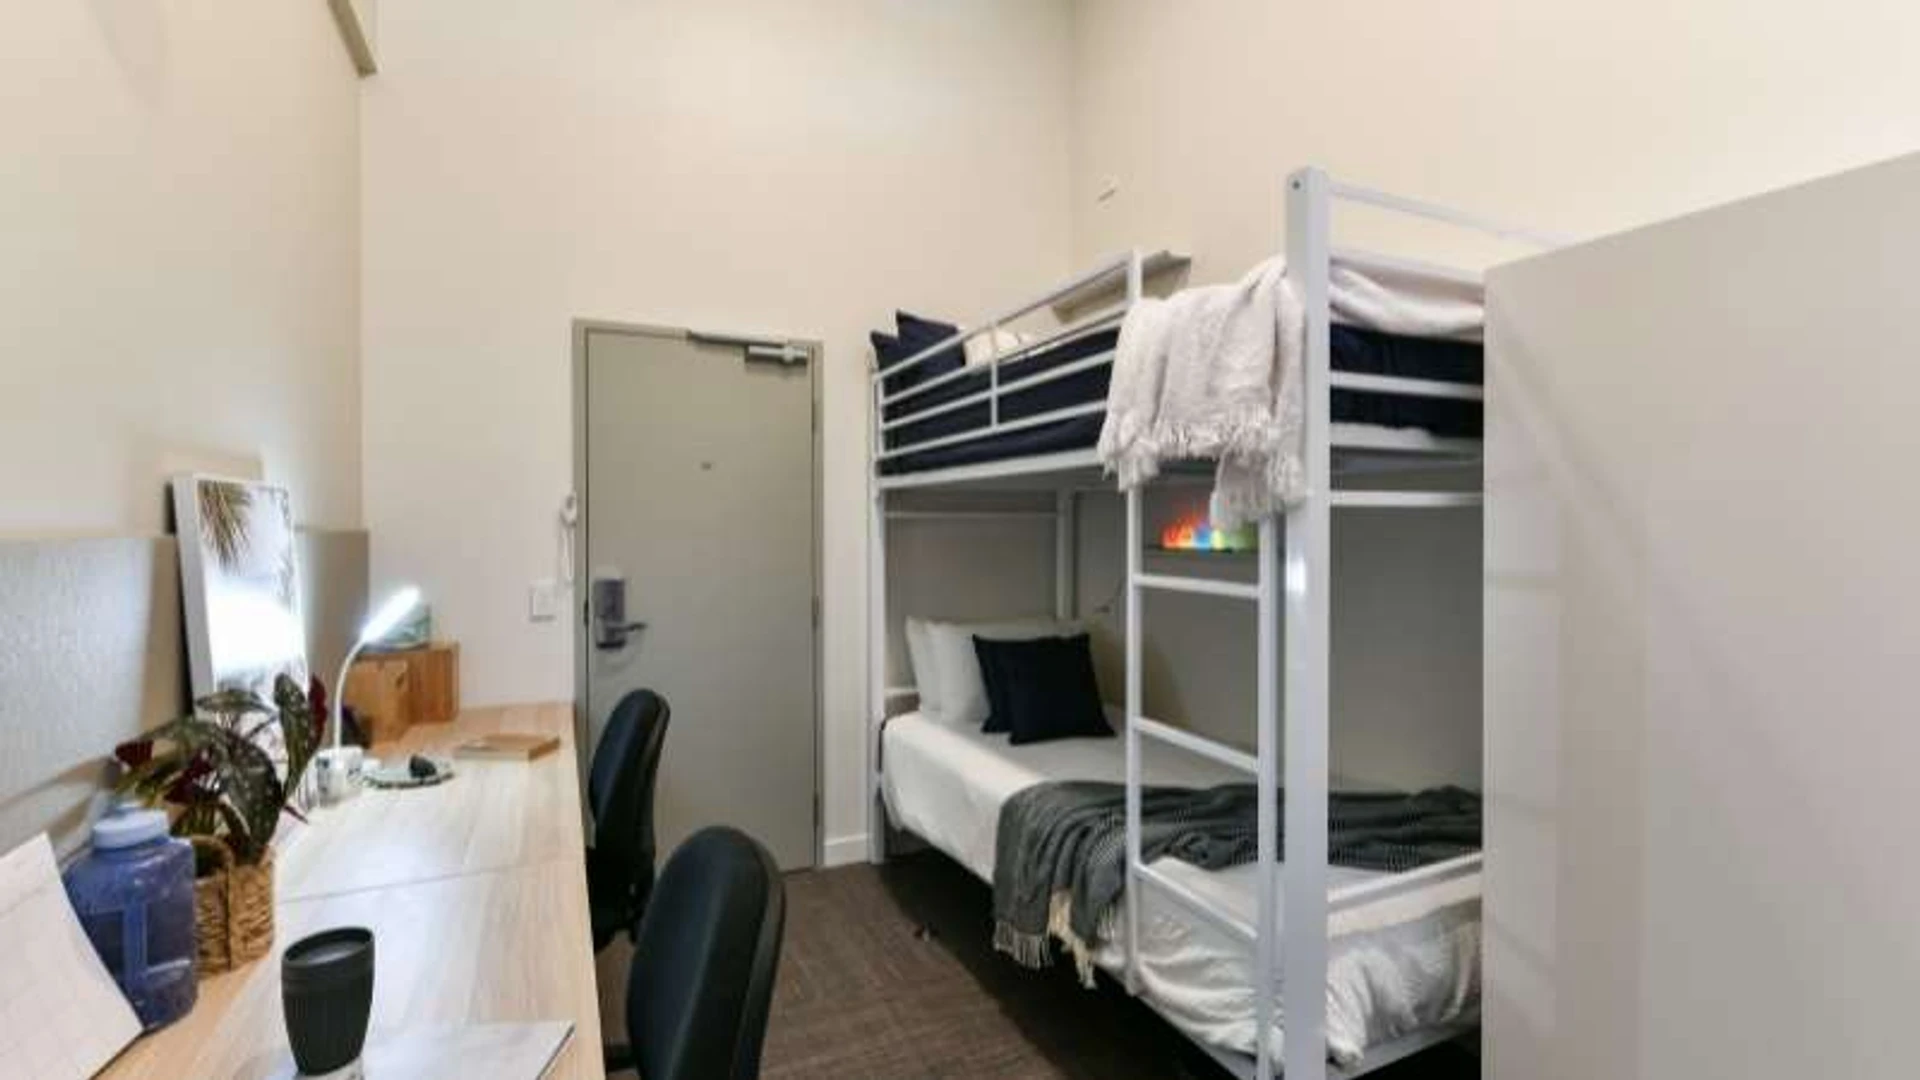 Renting rooms by the month in brisbane